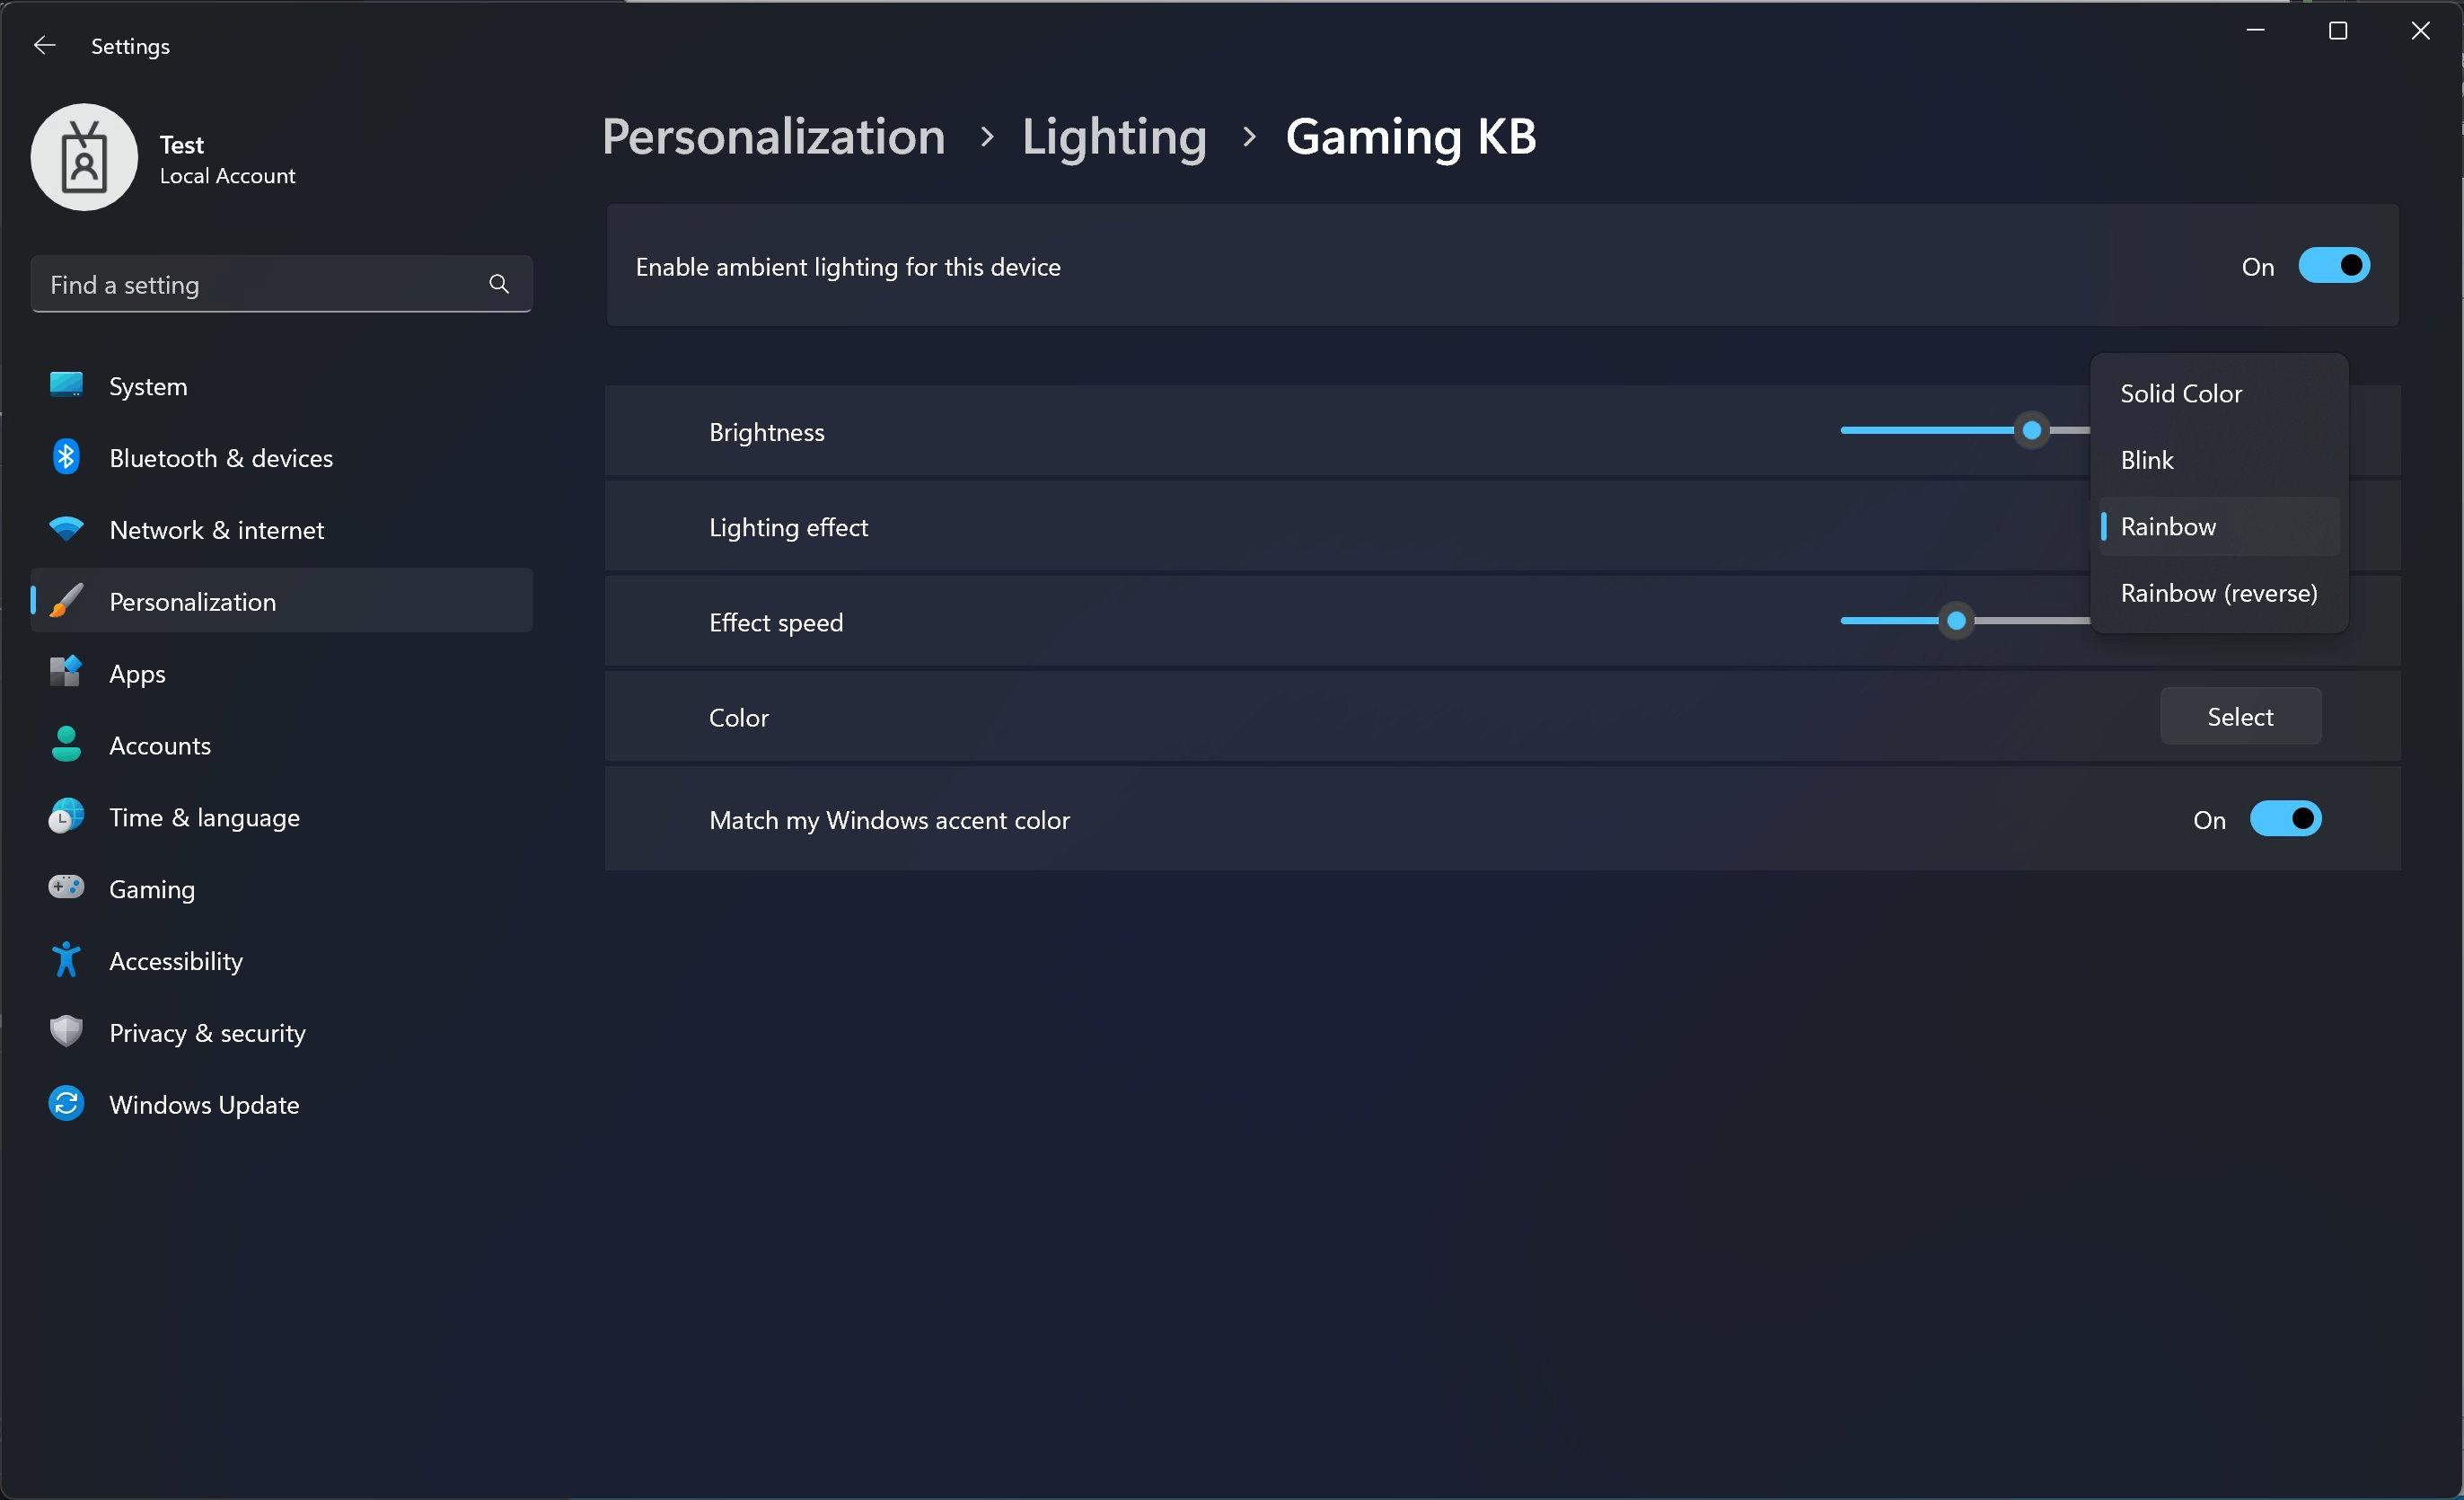 RGB Lighting Options For A Device